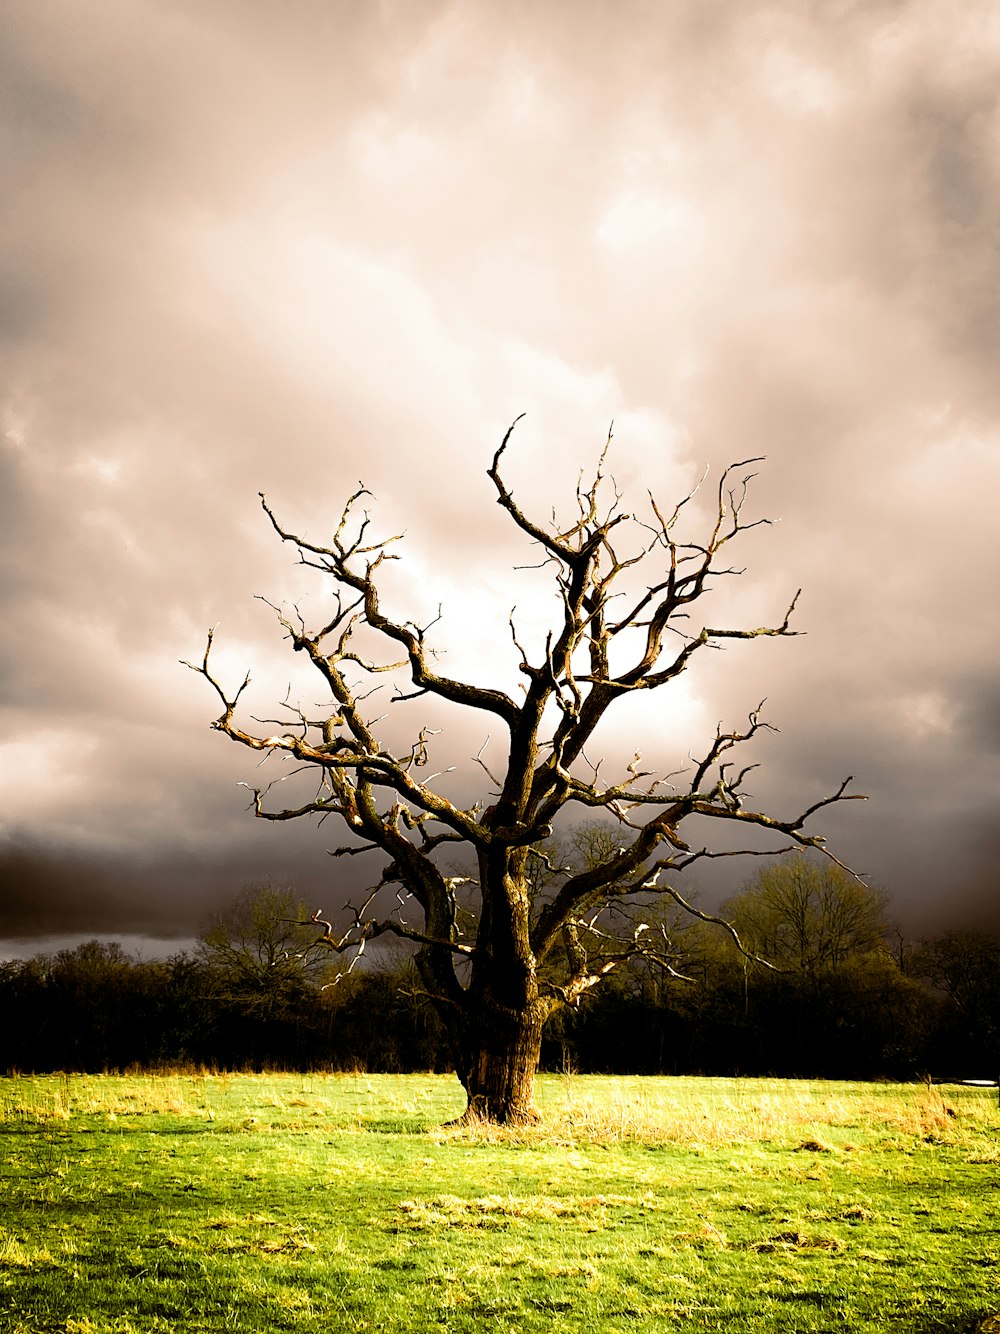 a bare tree in a grassy field under a cloudy sky